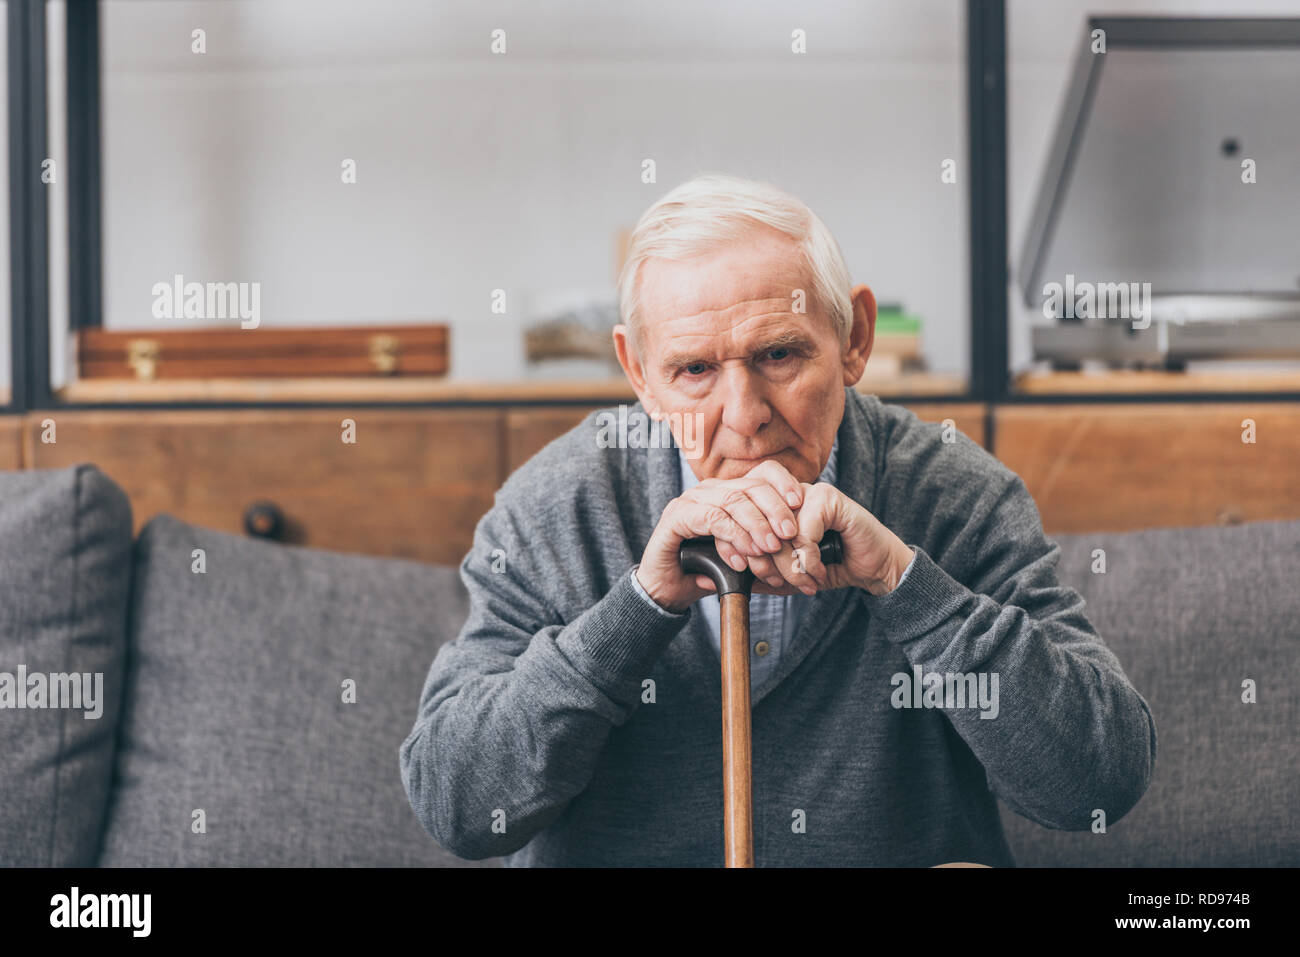 upset retired man with grey hair sitting with walking cane in living room Stock Photo